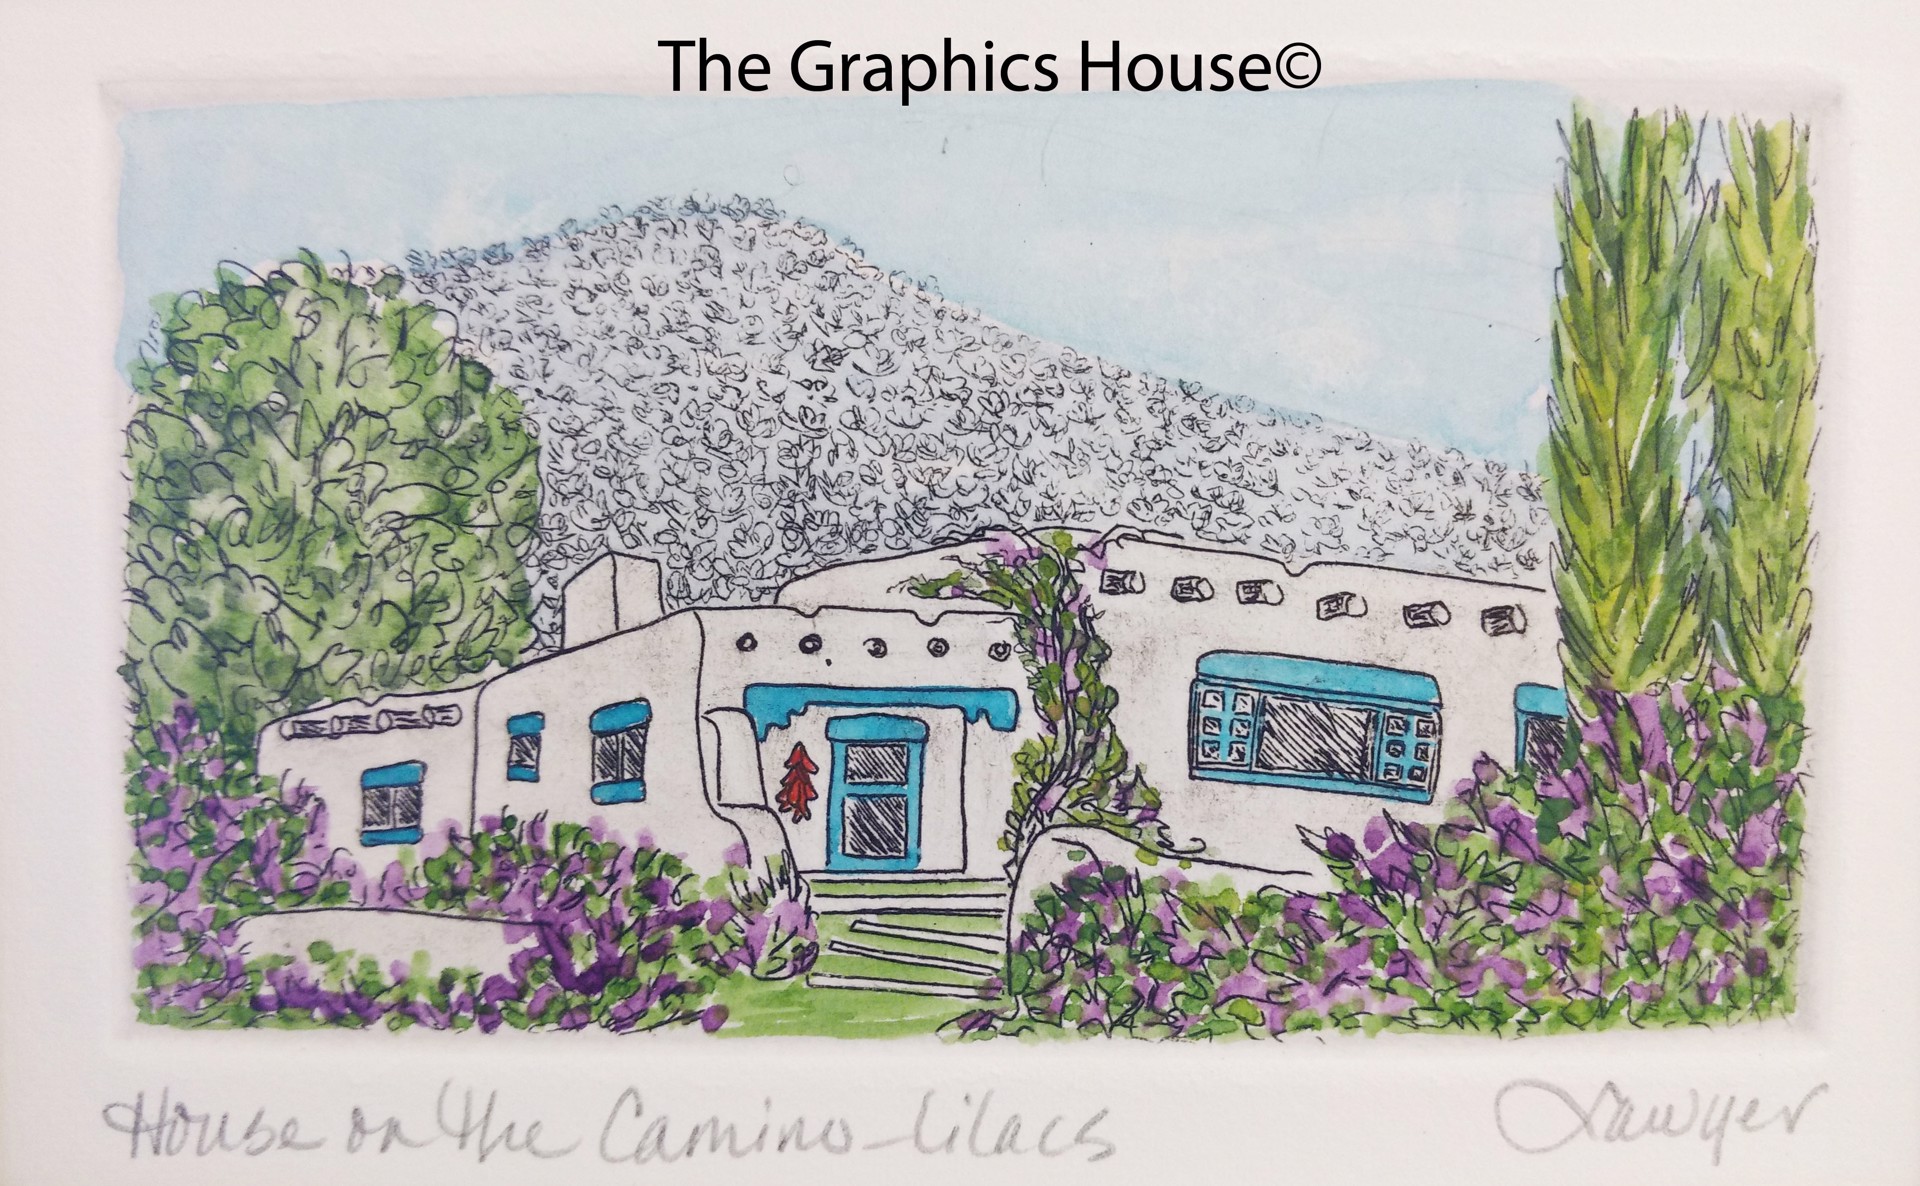 House on the Camino - Lilacs (unframed) by Anne Sawyer